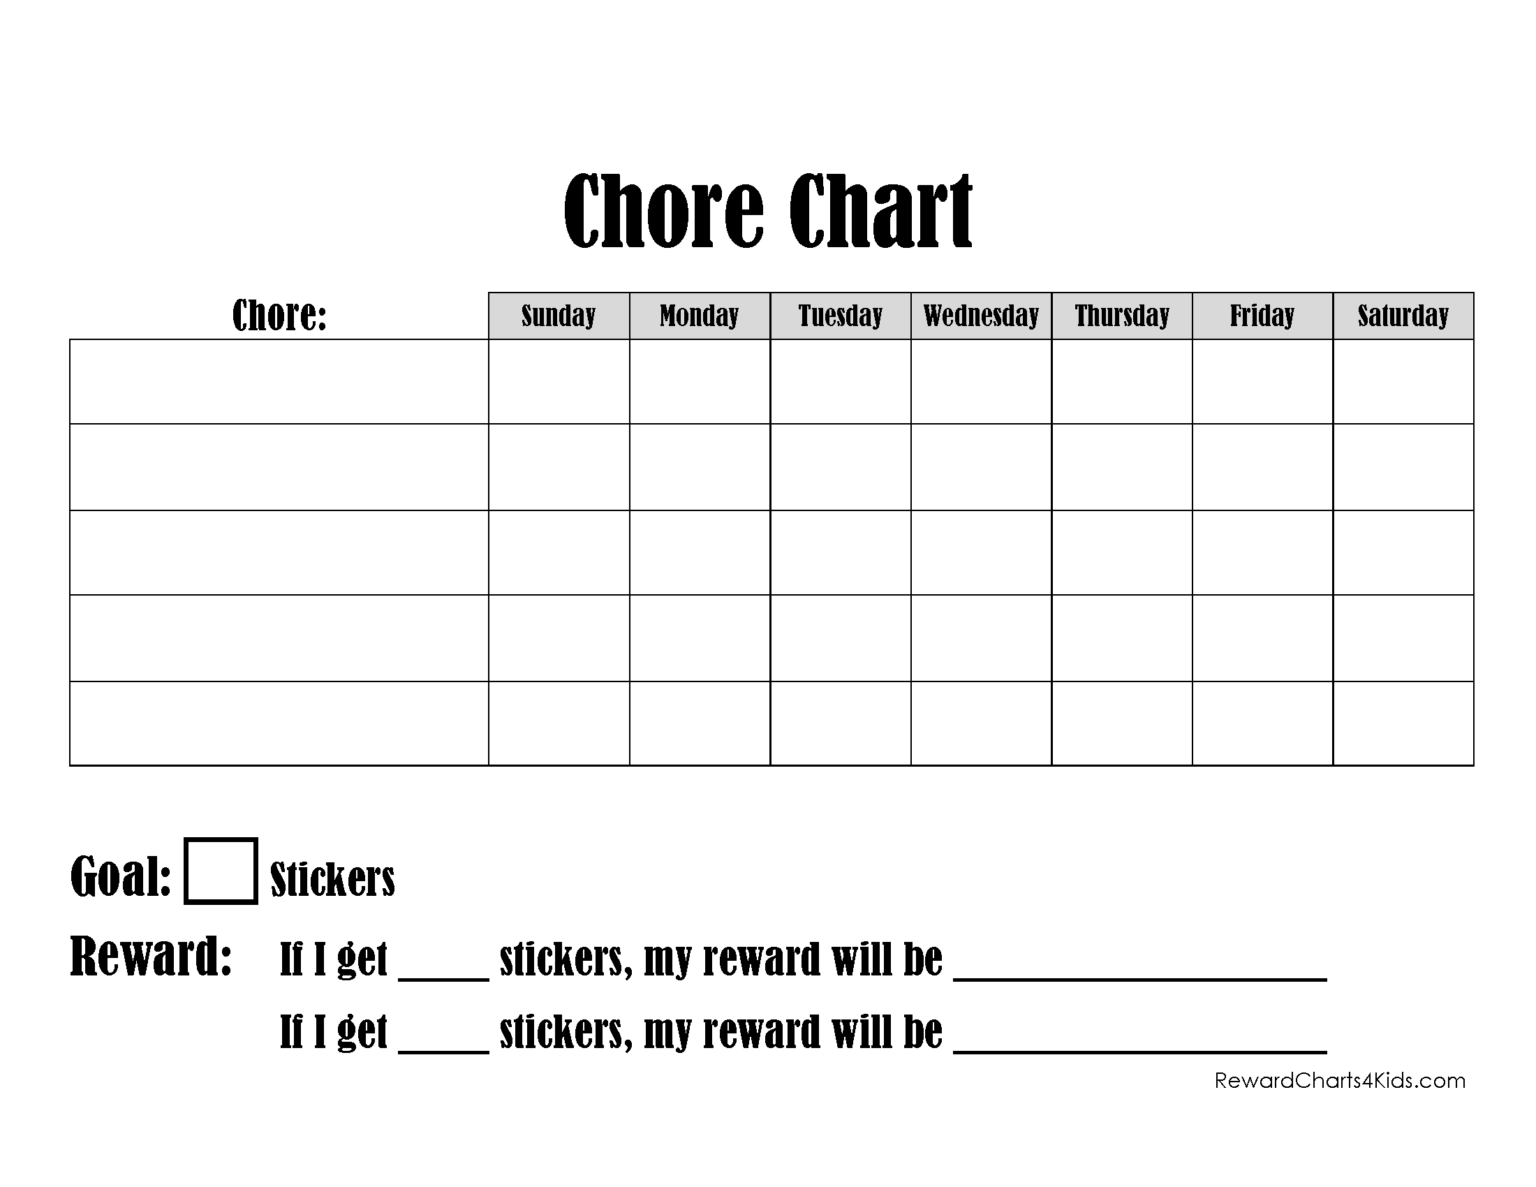 printable-chore-charts-for-13-year-olds-printablechorecharts